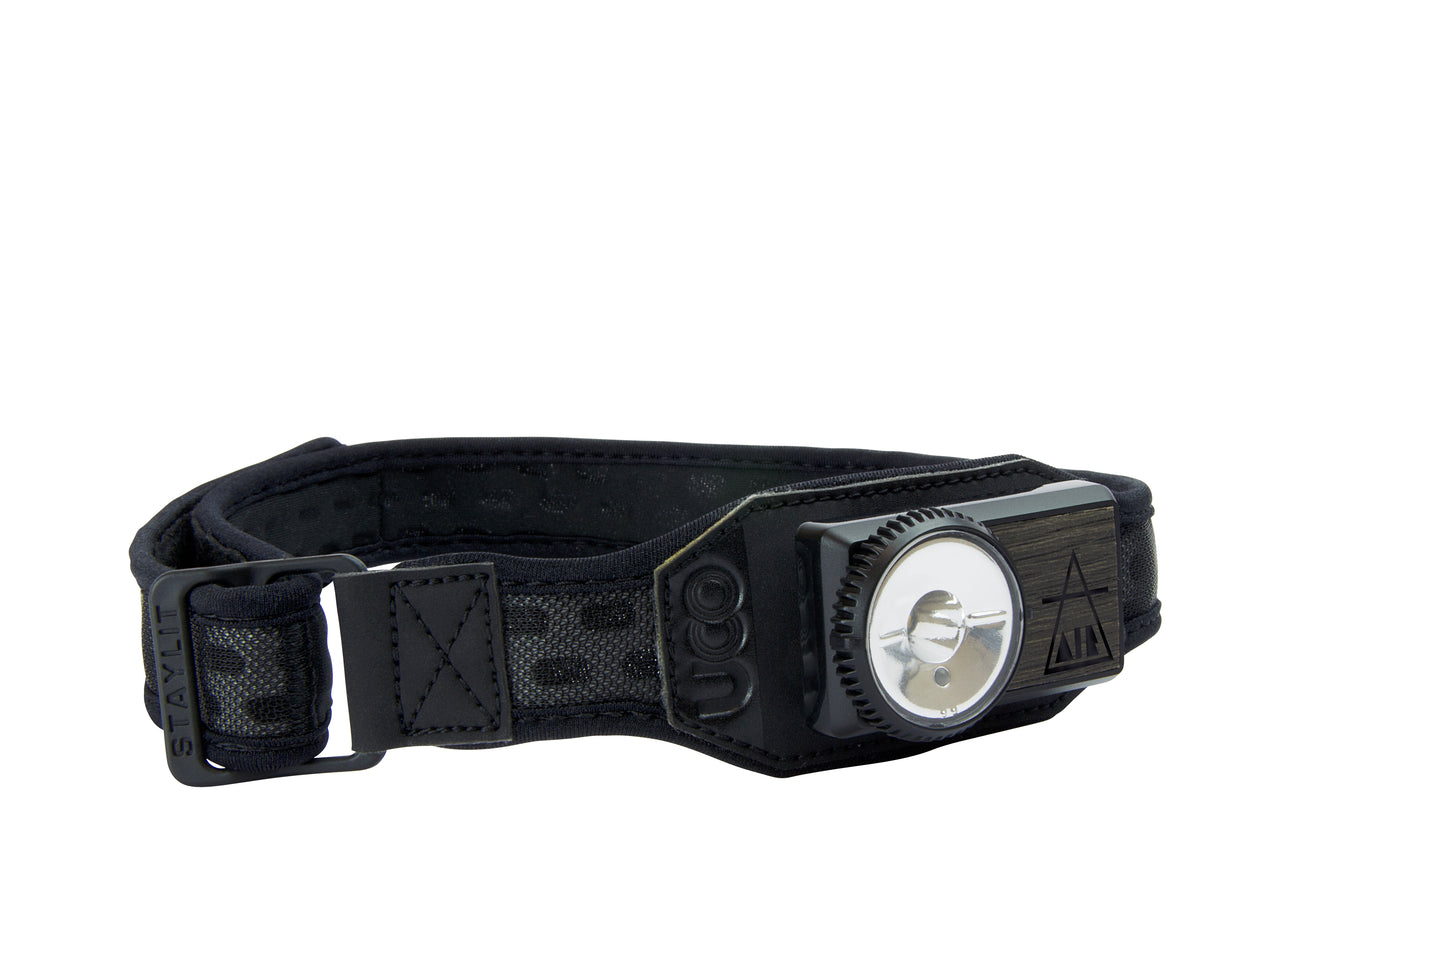 UCO AIR Rechargeable Lithium Headlamp, Black Mesh